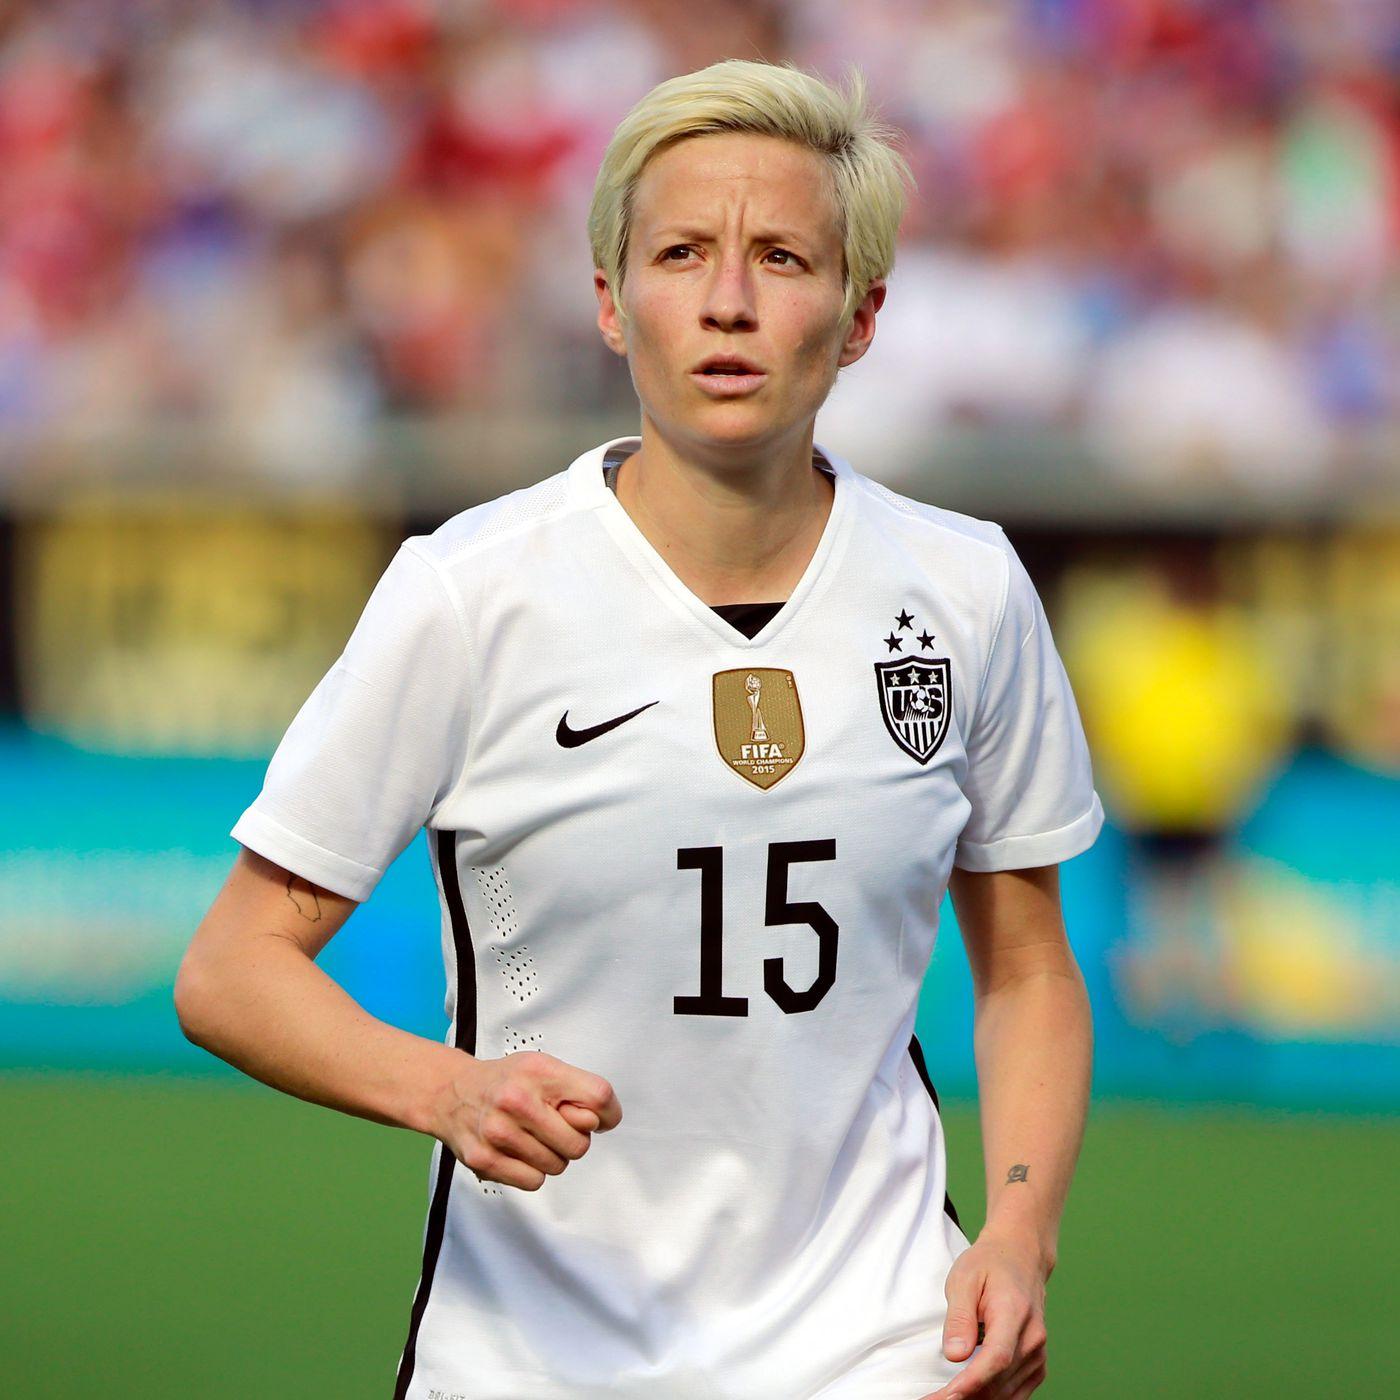 Will Megan Rapinoe be healthy in time for the Olympics?